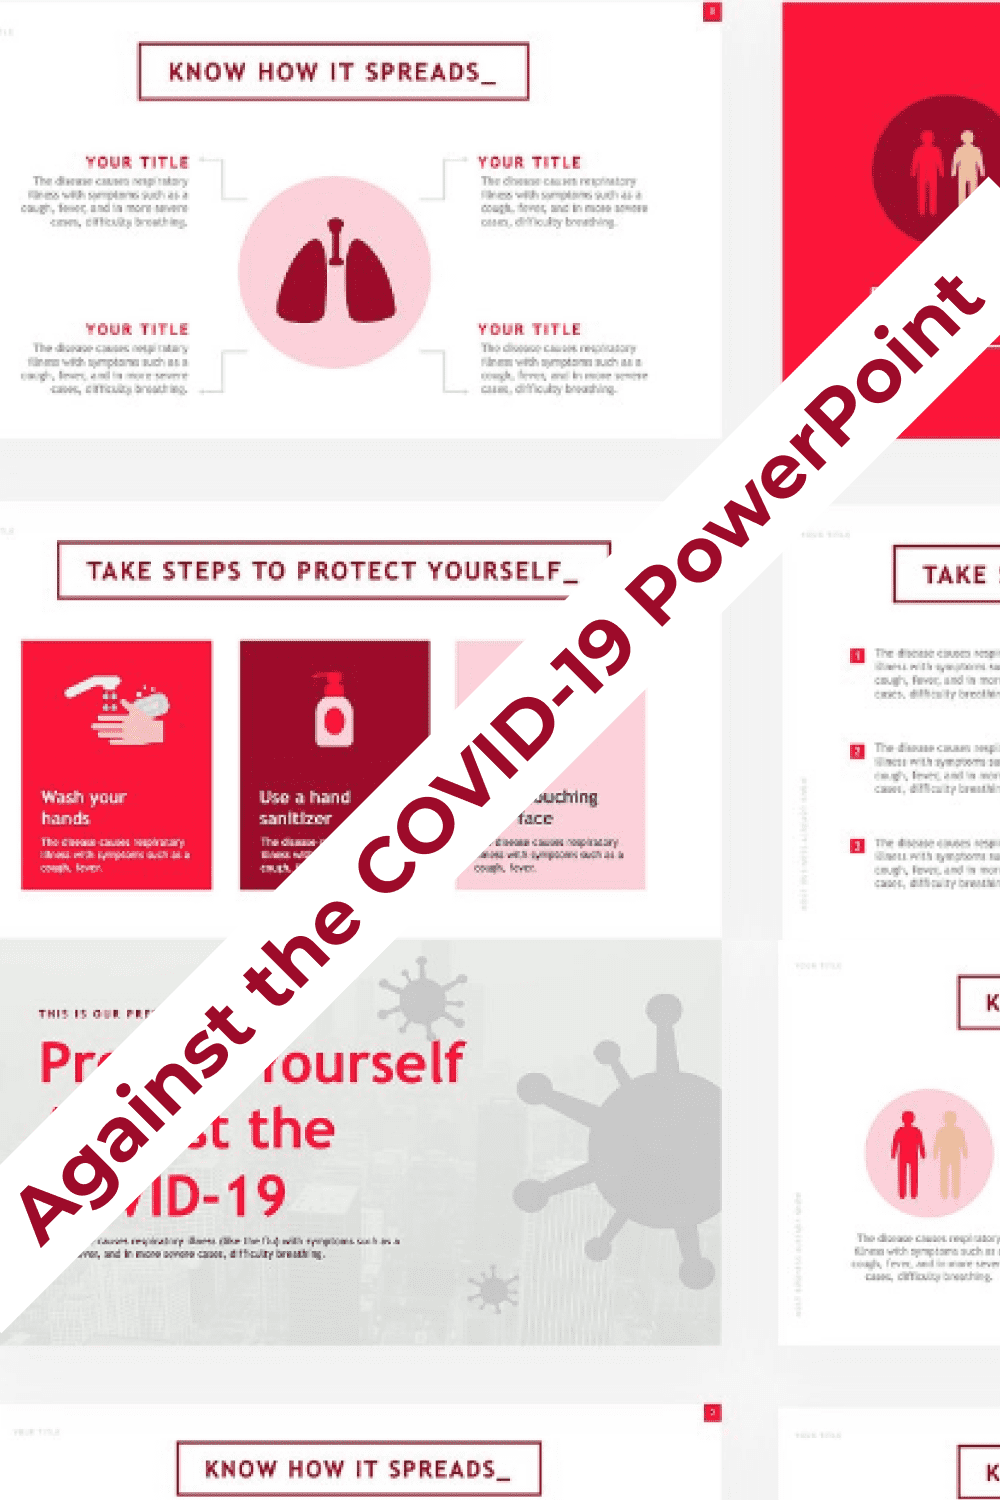 Against the COVID-19 PowerPoint Pinterest.